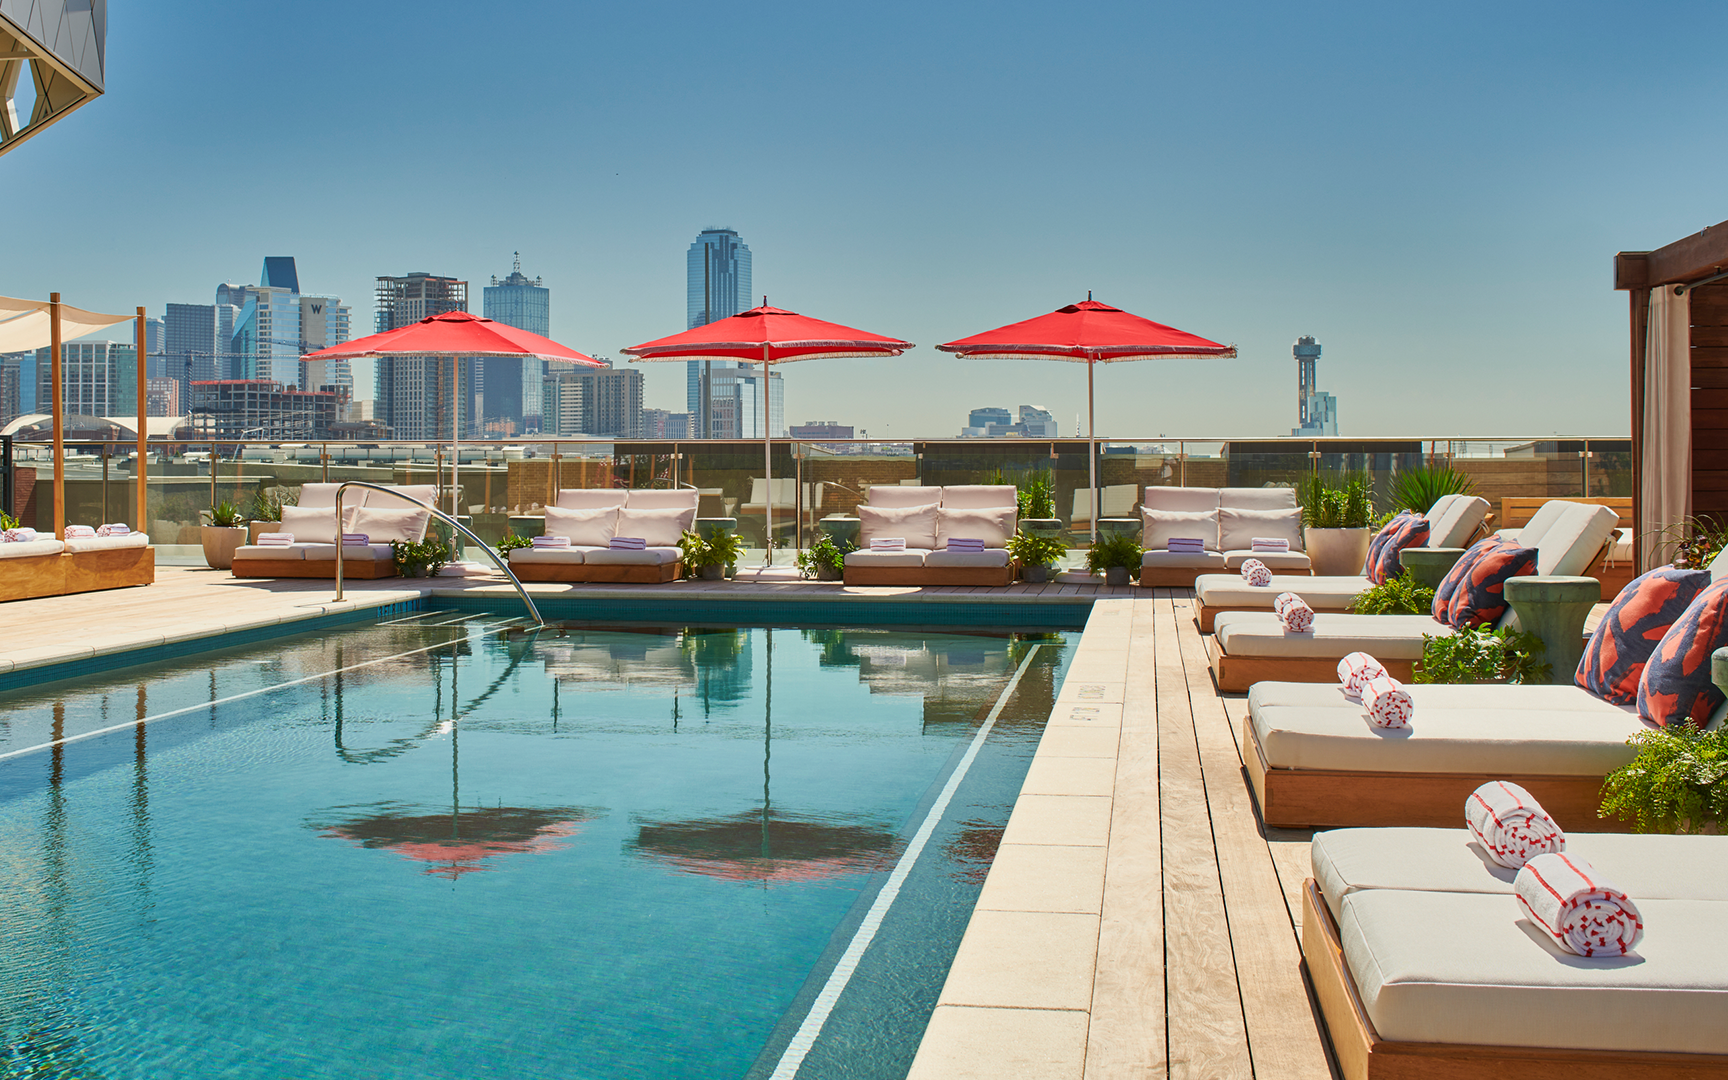 An image of the rooftop pool in Virgin Hotels Dallas